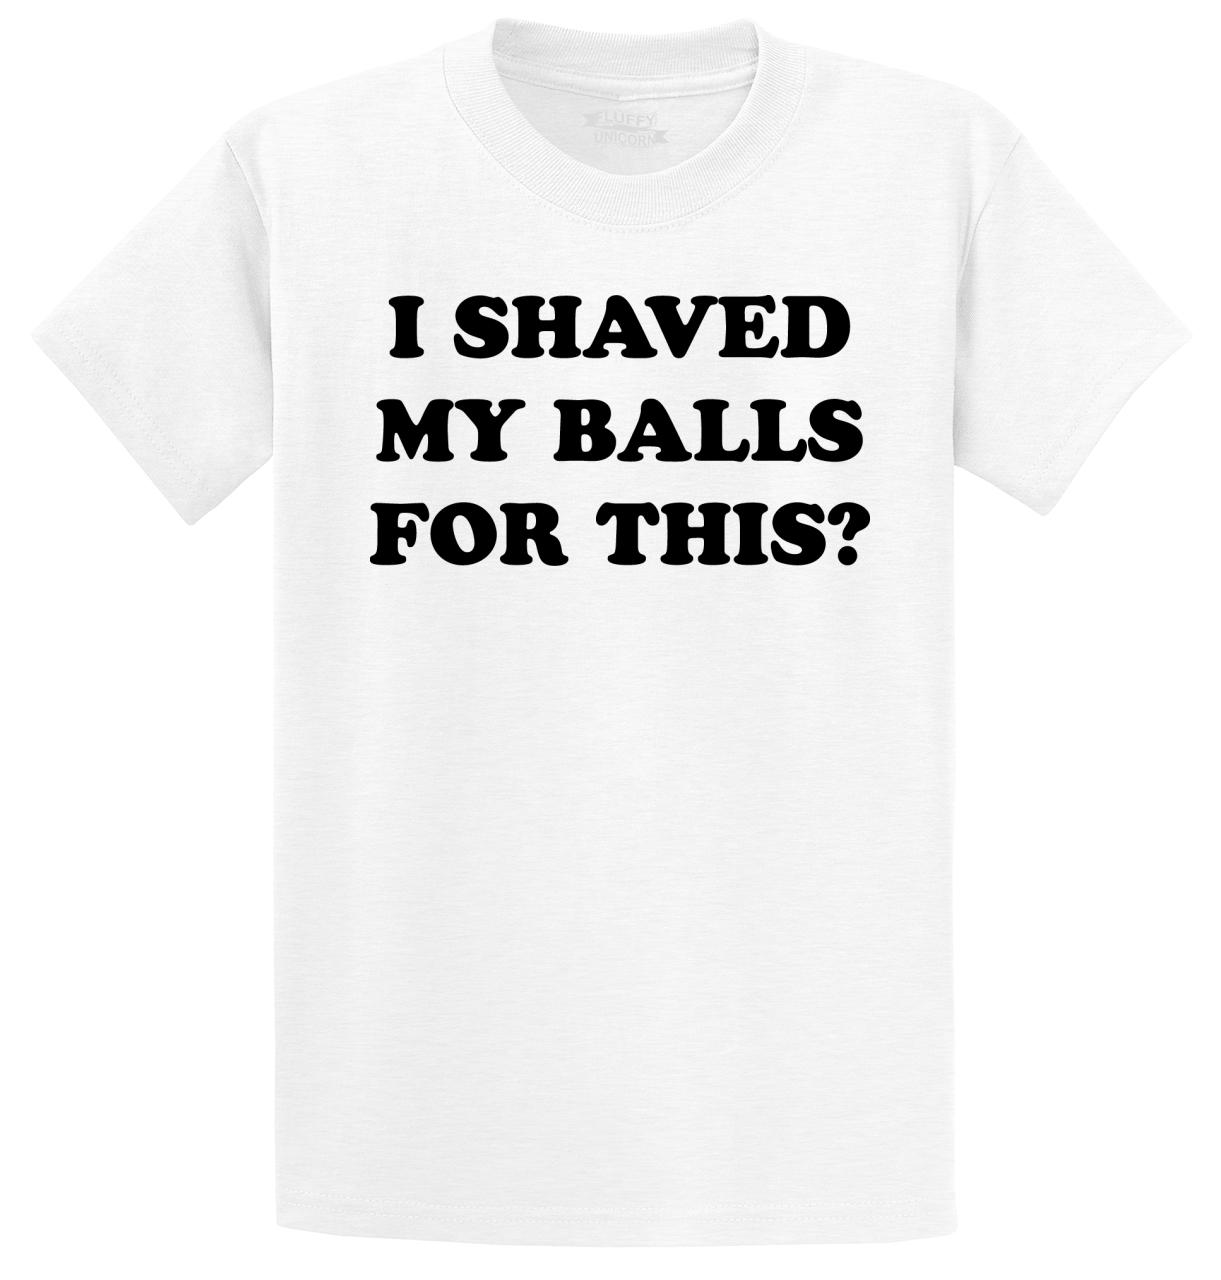 I Shaved My Balls For This Funny T Shirt Adult Humor Rude Sex